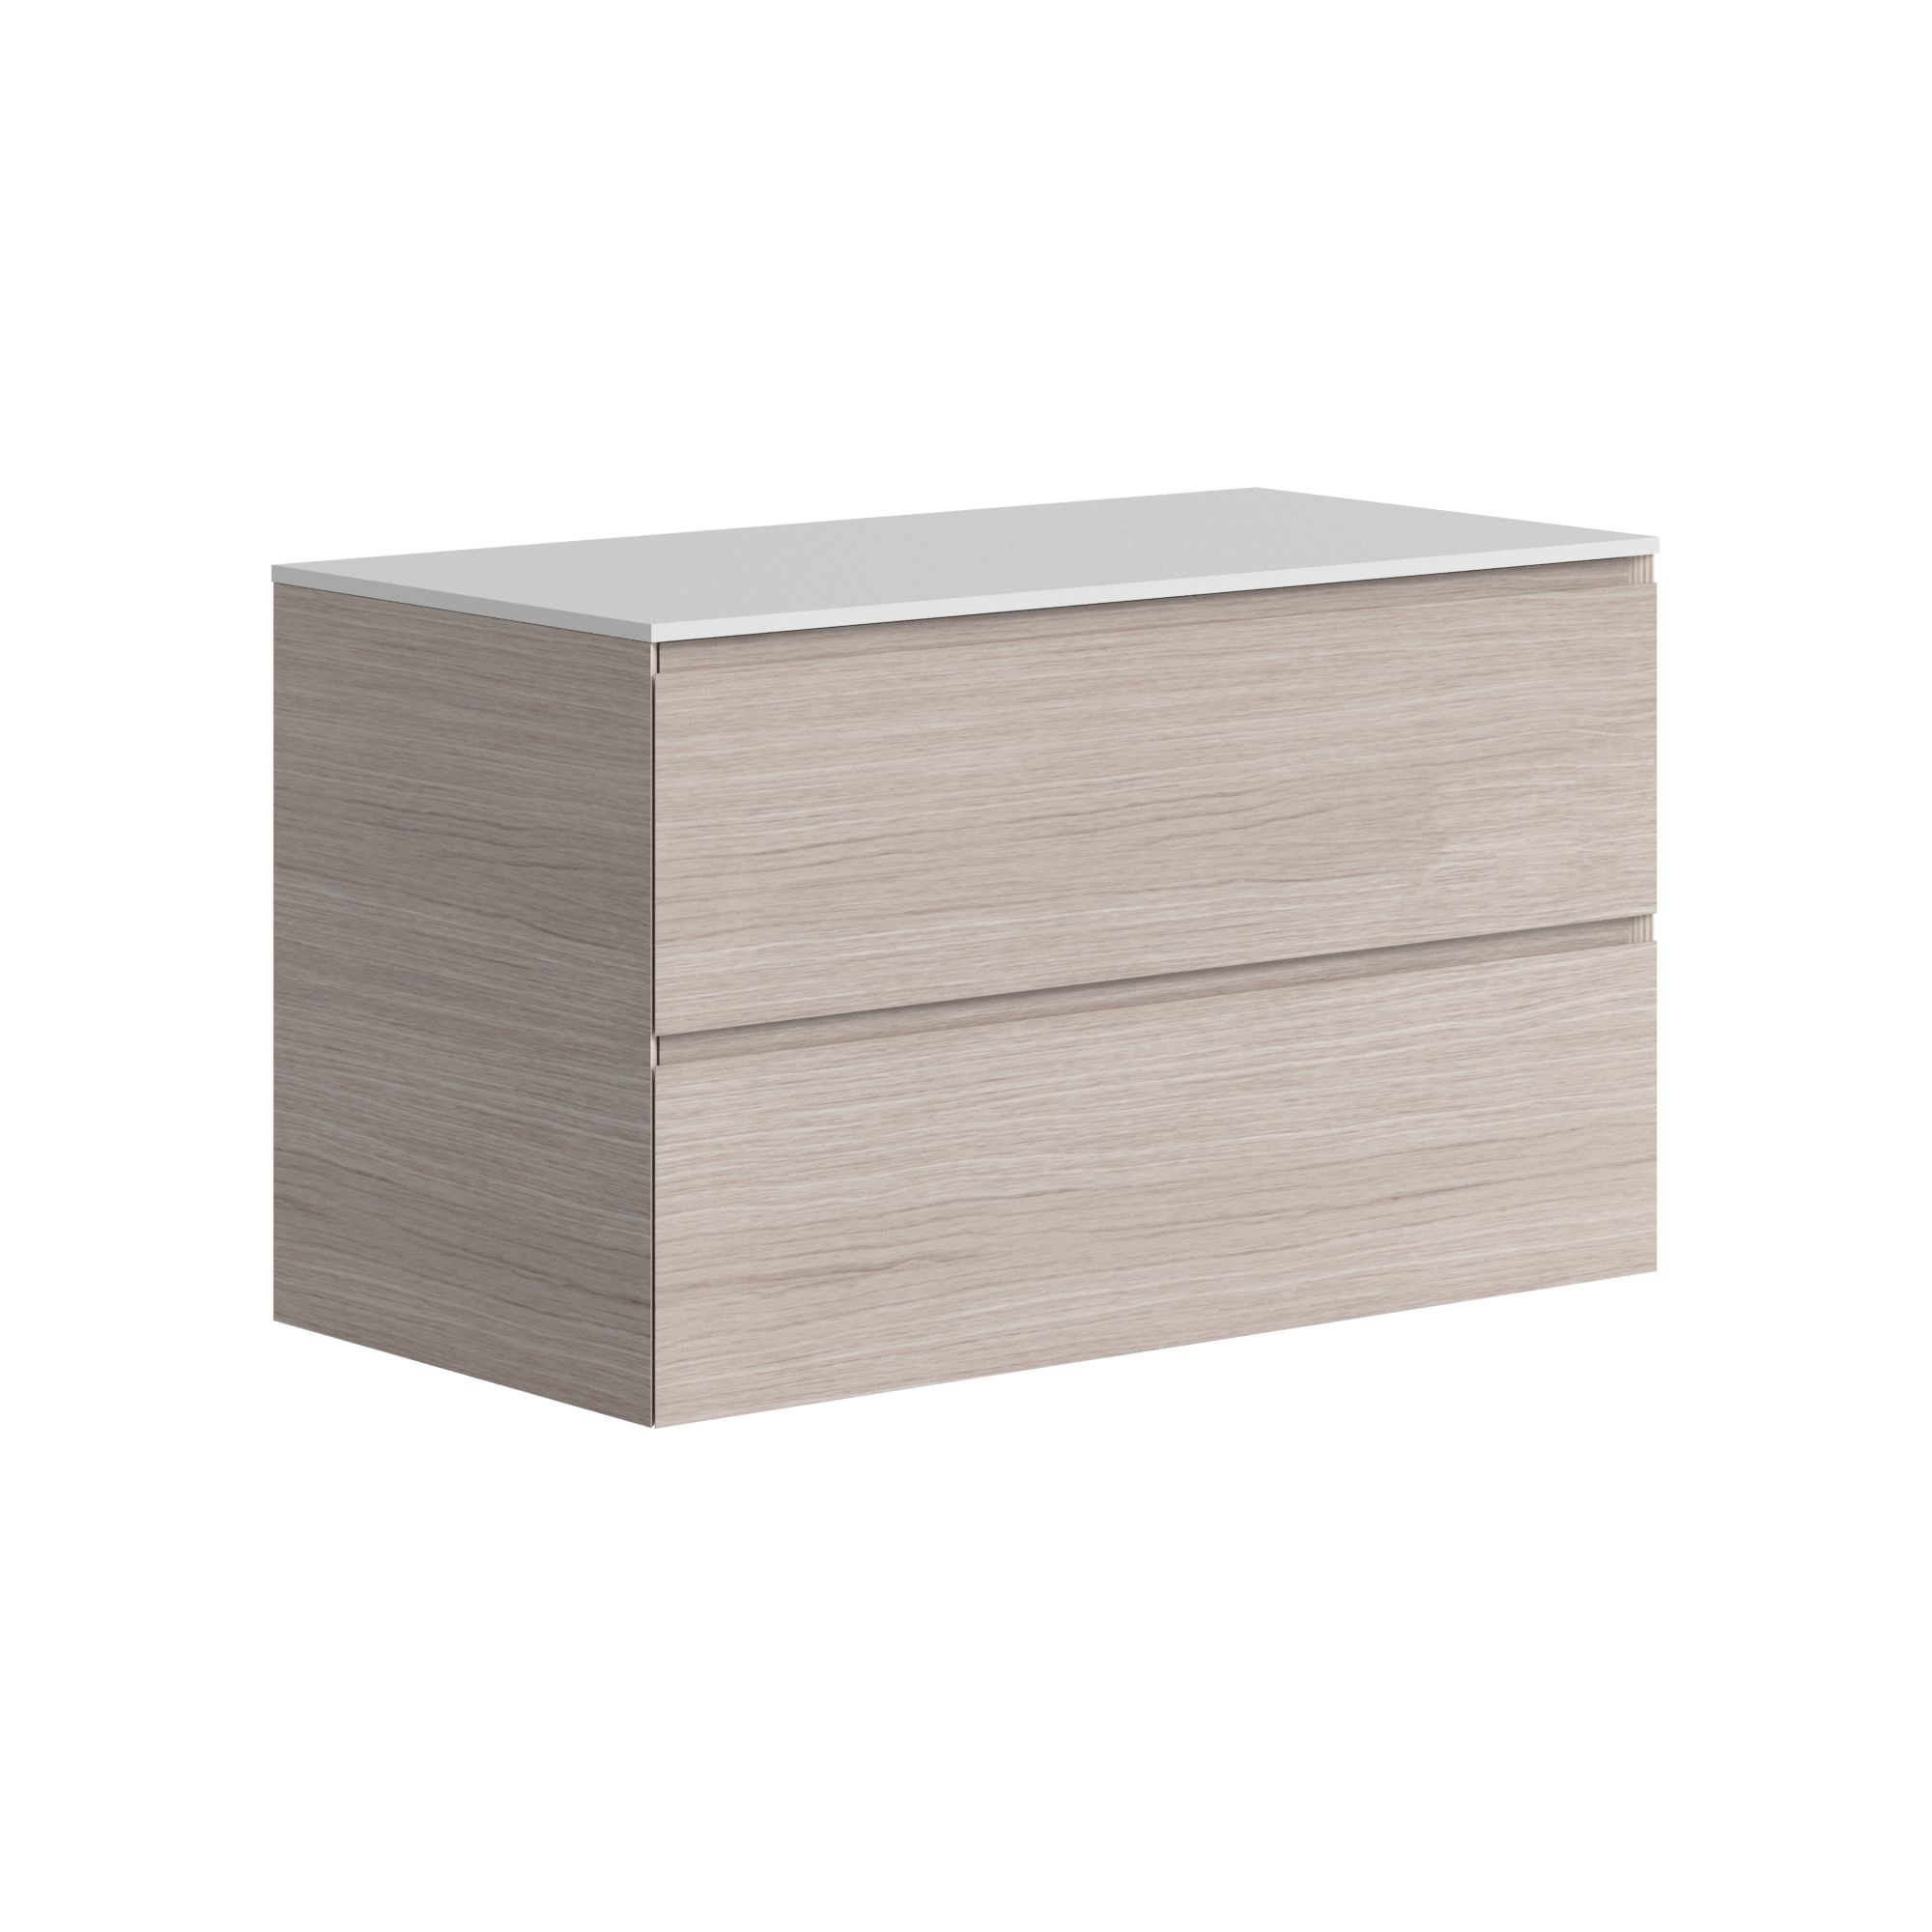 The Ellery Washbasin Pull Open Unit 1000x520mm with Solid Surface Countertop